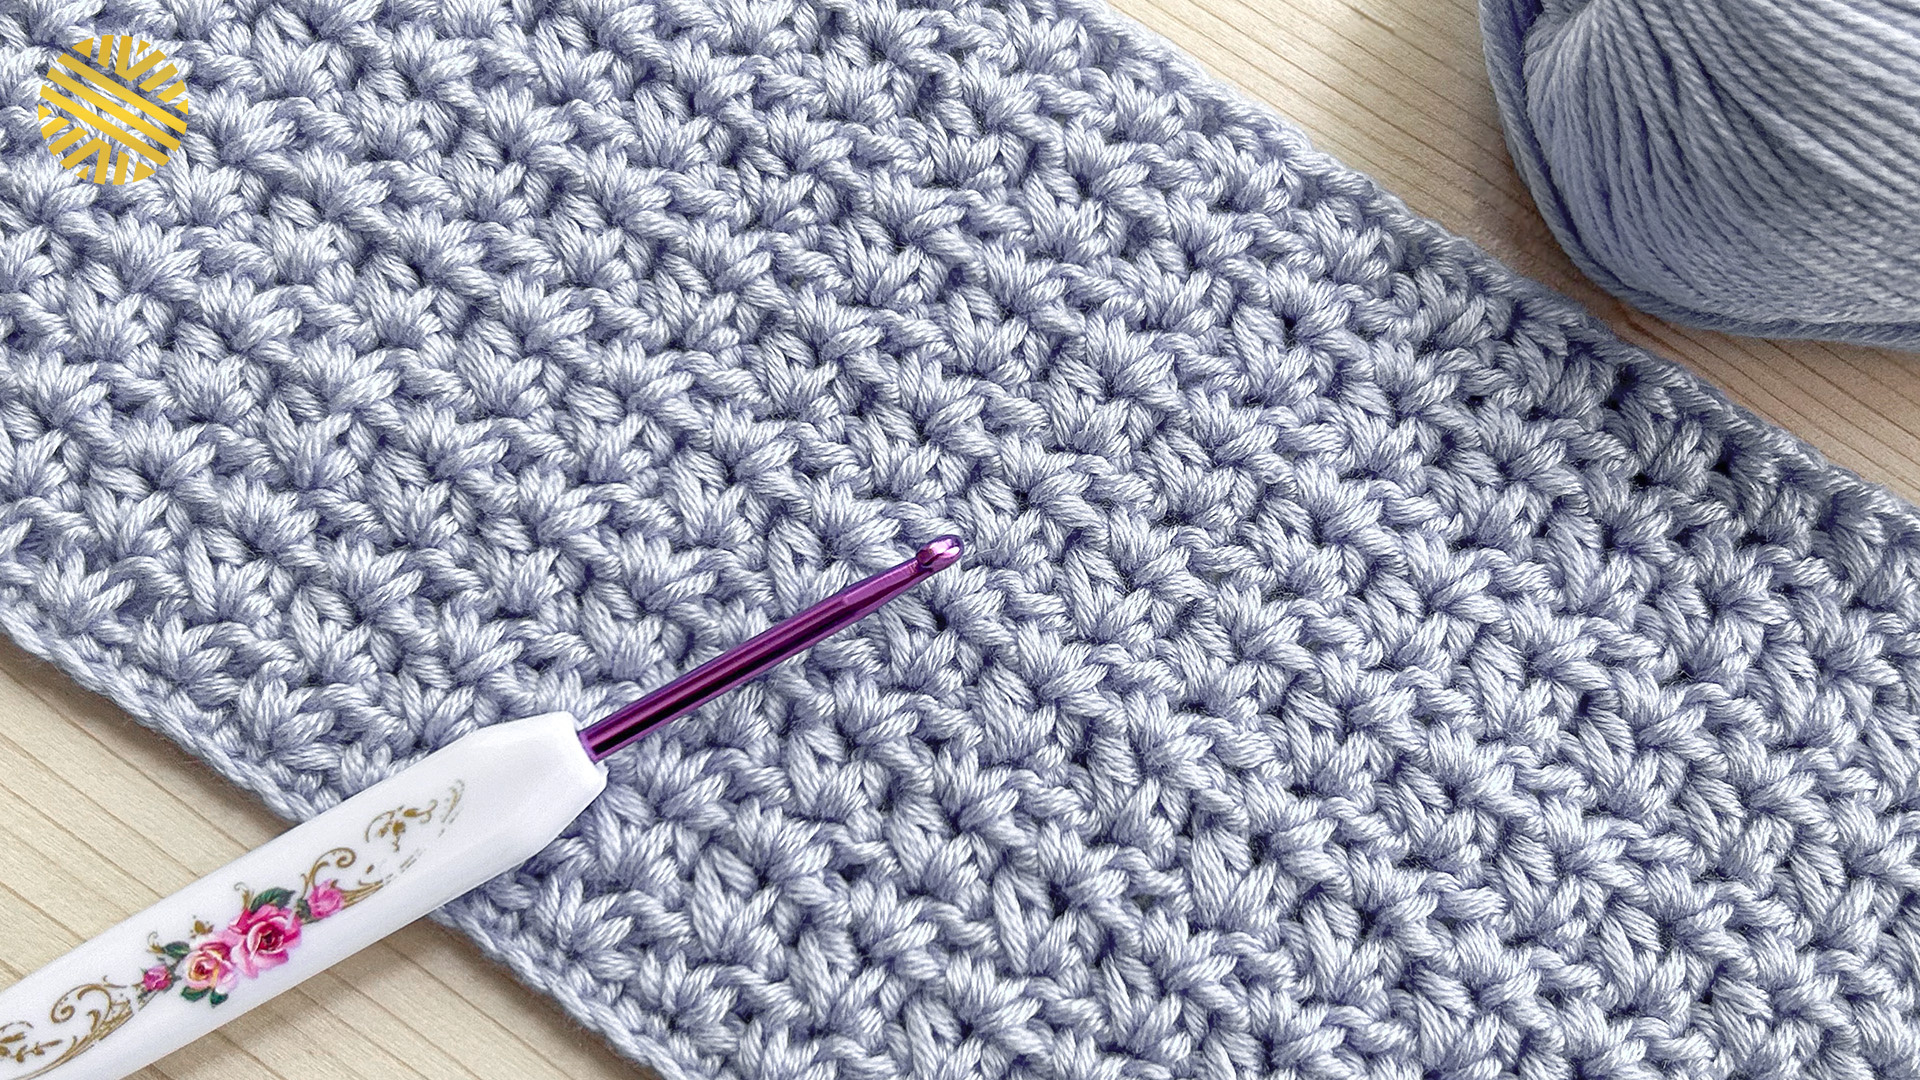 Crochet Projects for Absolute Beginners 